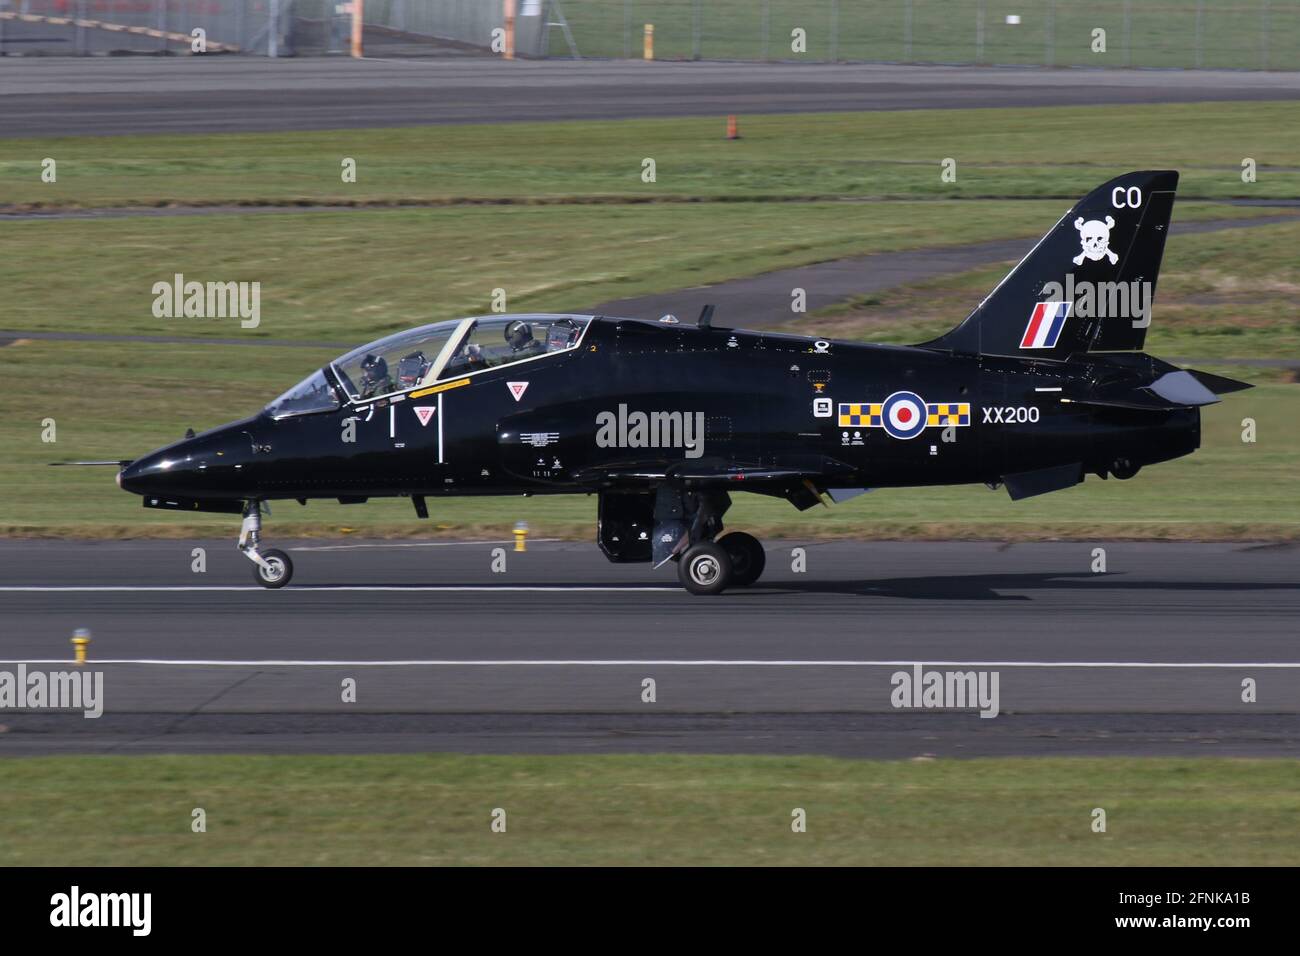 XX200, a BAe Hawk T1A in the colours of 100 Squadron, Royal Air Force, arriving at Prestwick Airport, Ayrshire in preparation for its participation in Exercise Joint Warrior 21-1. Stock Photo